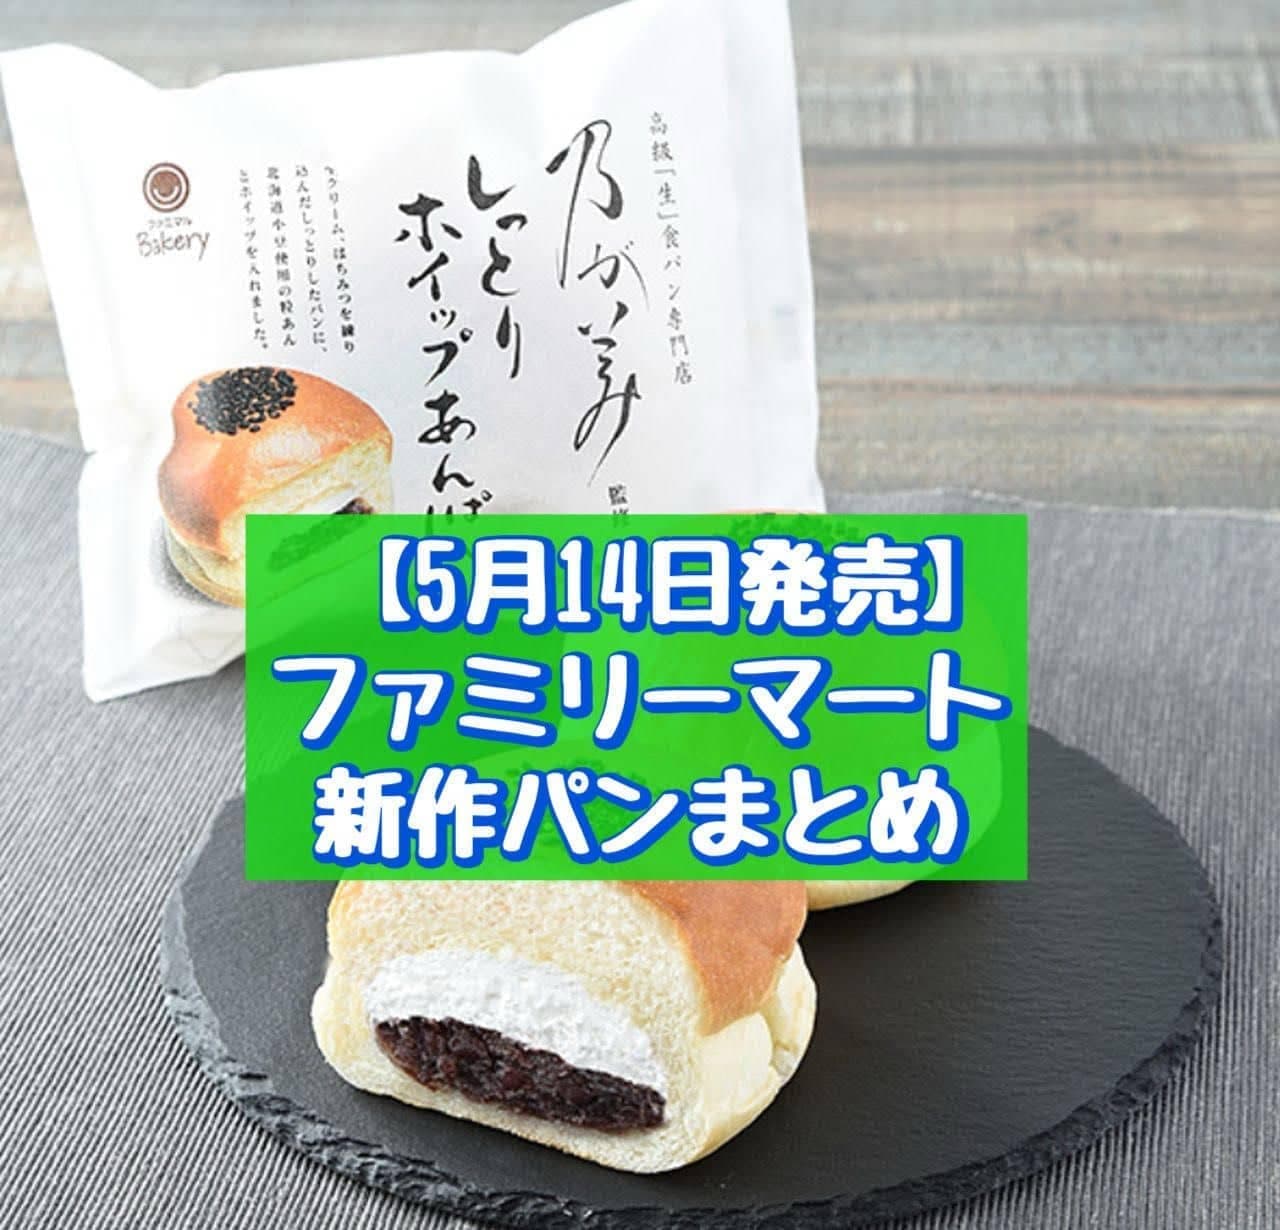 May 14 release】Summary of FamilyMart's new breads